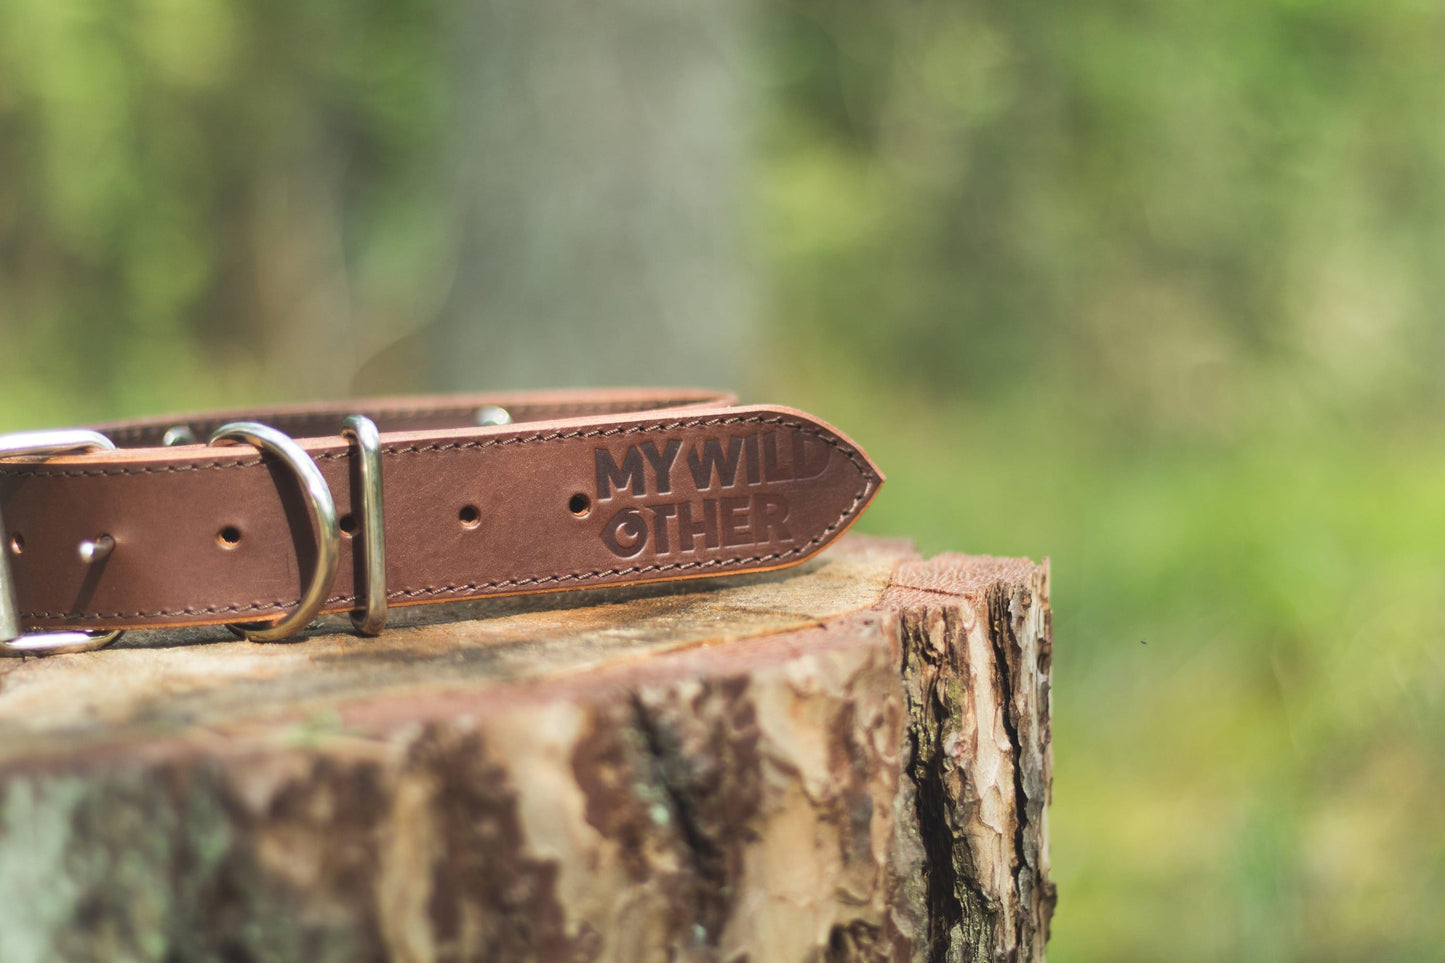 Handmade brown leather STUDDED dog collar - premium dog goods handmade in Europe by My Wild Other